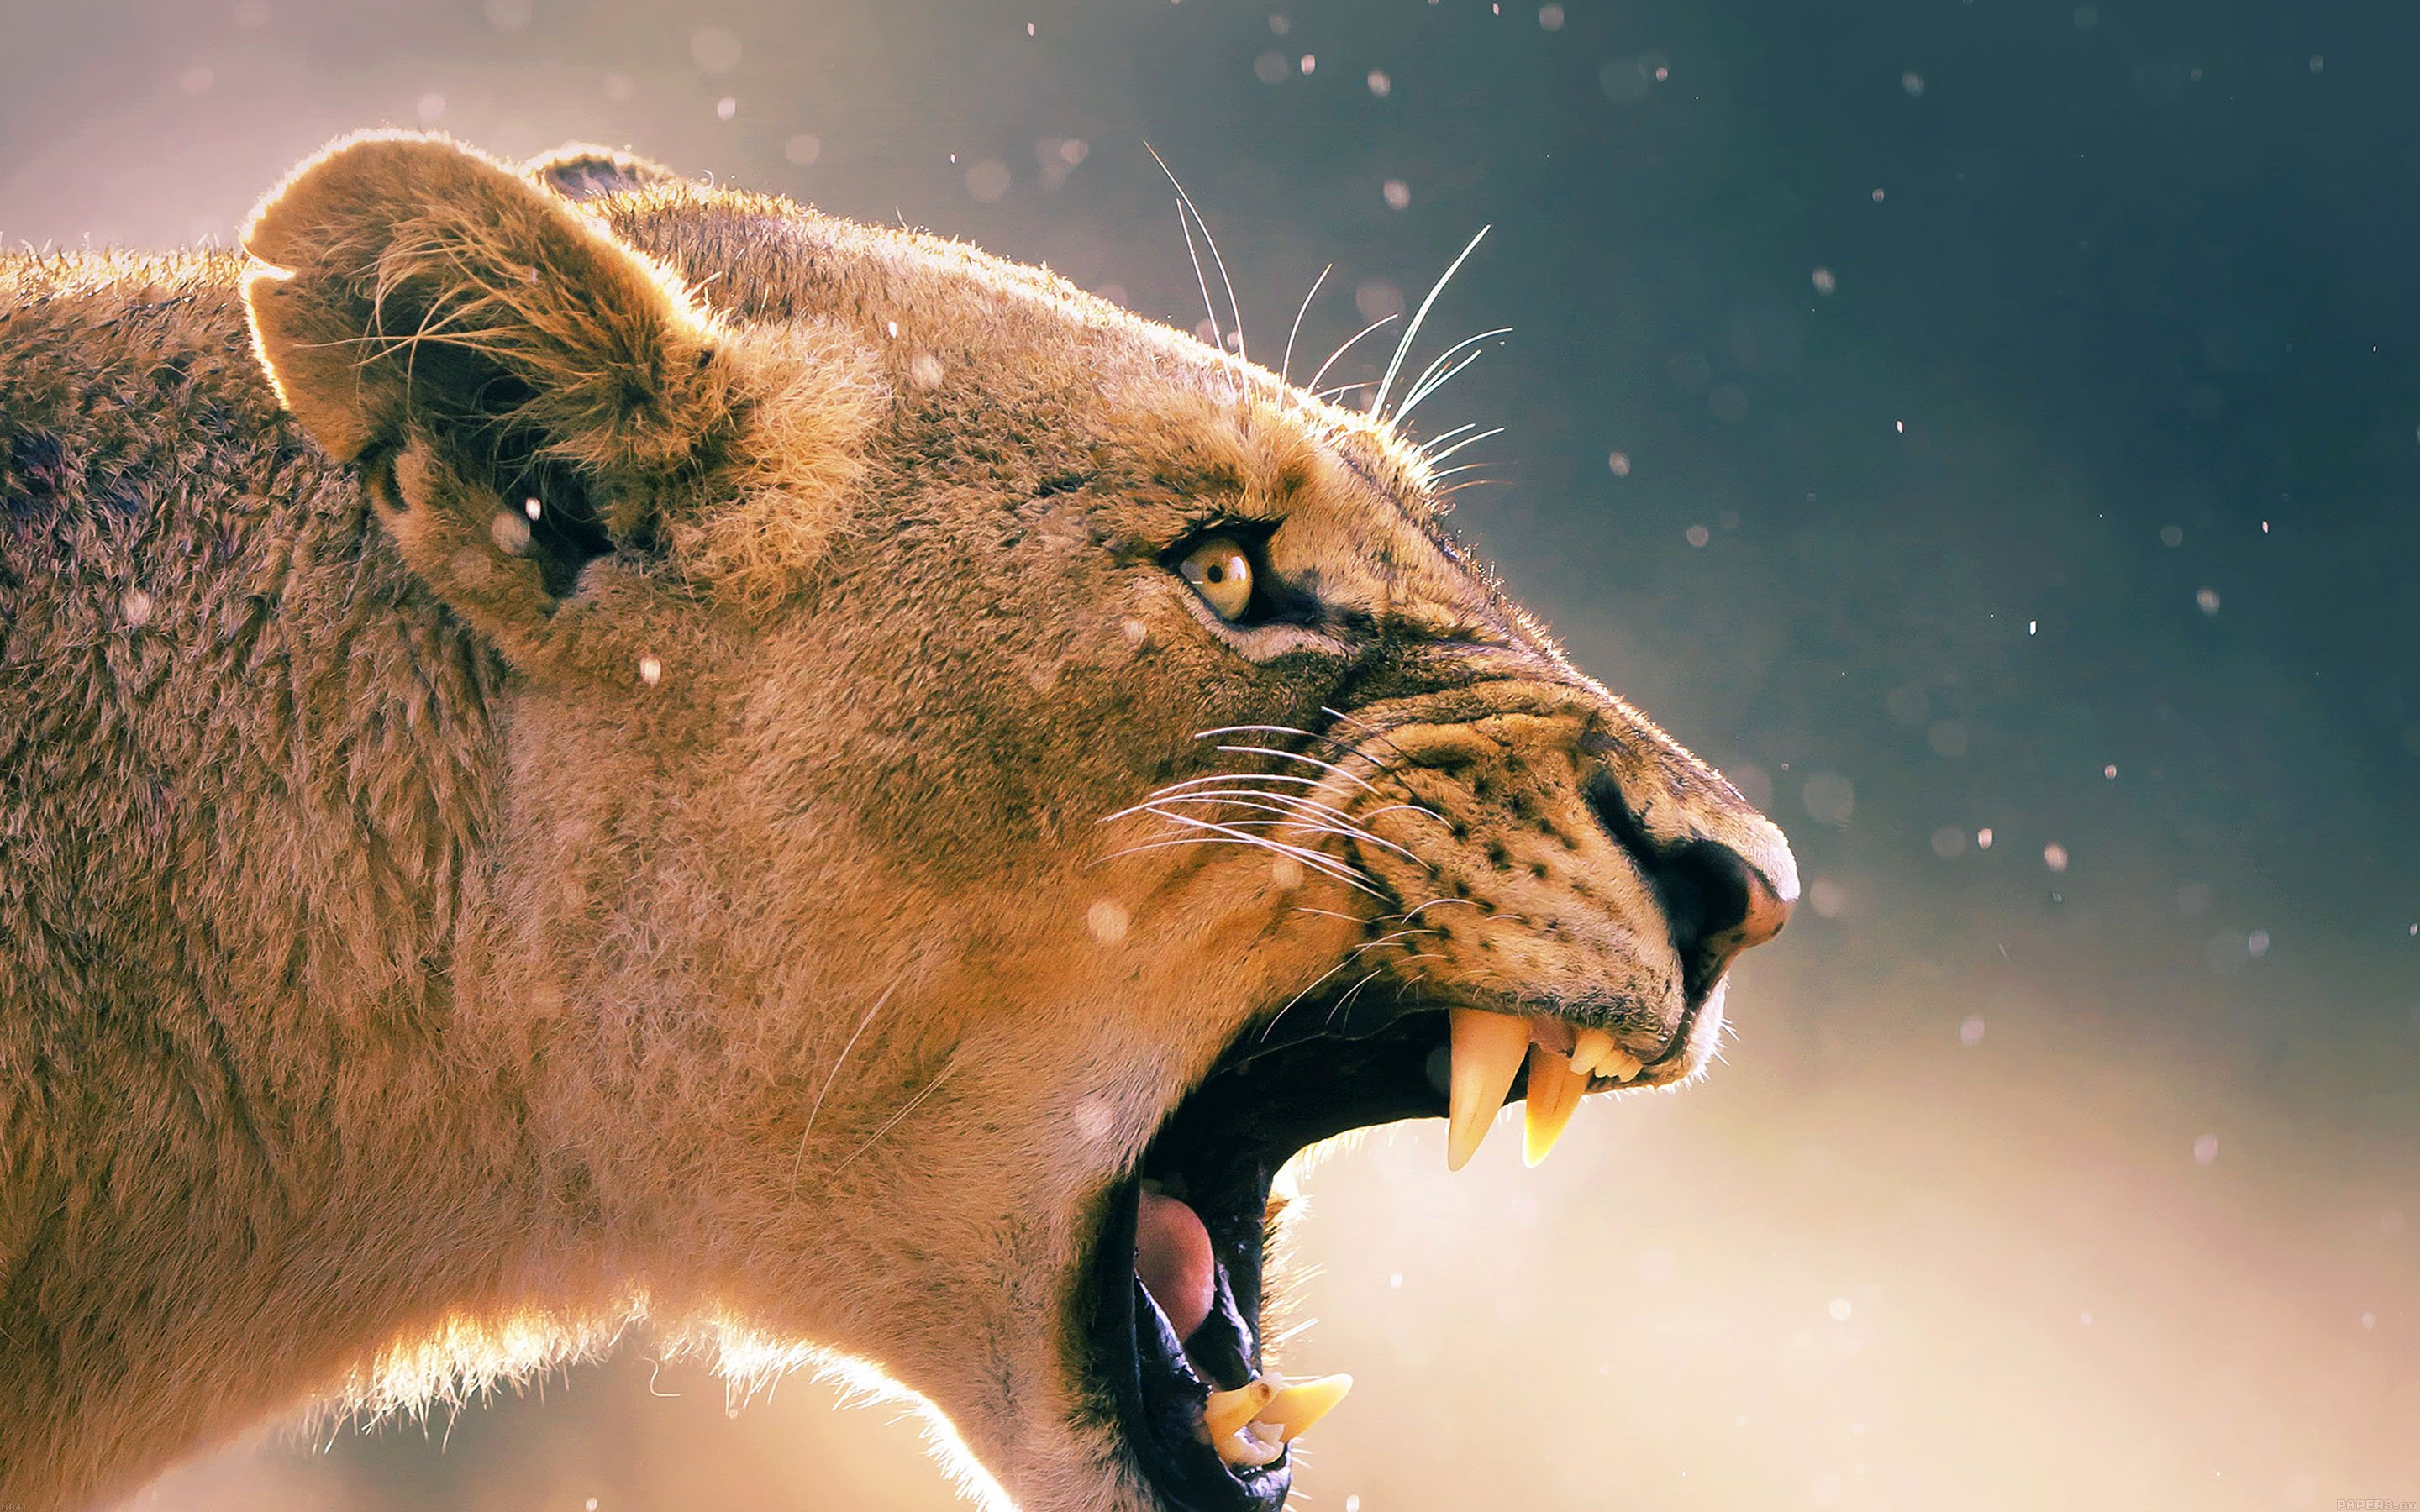 Angry Animal Female Lion Hd Desktop Backgrounds Free Download 2880x1800 :  